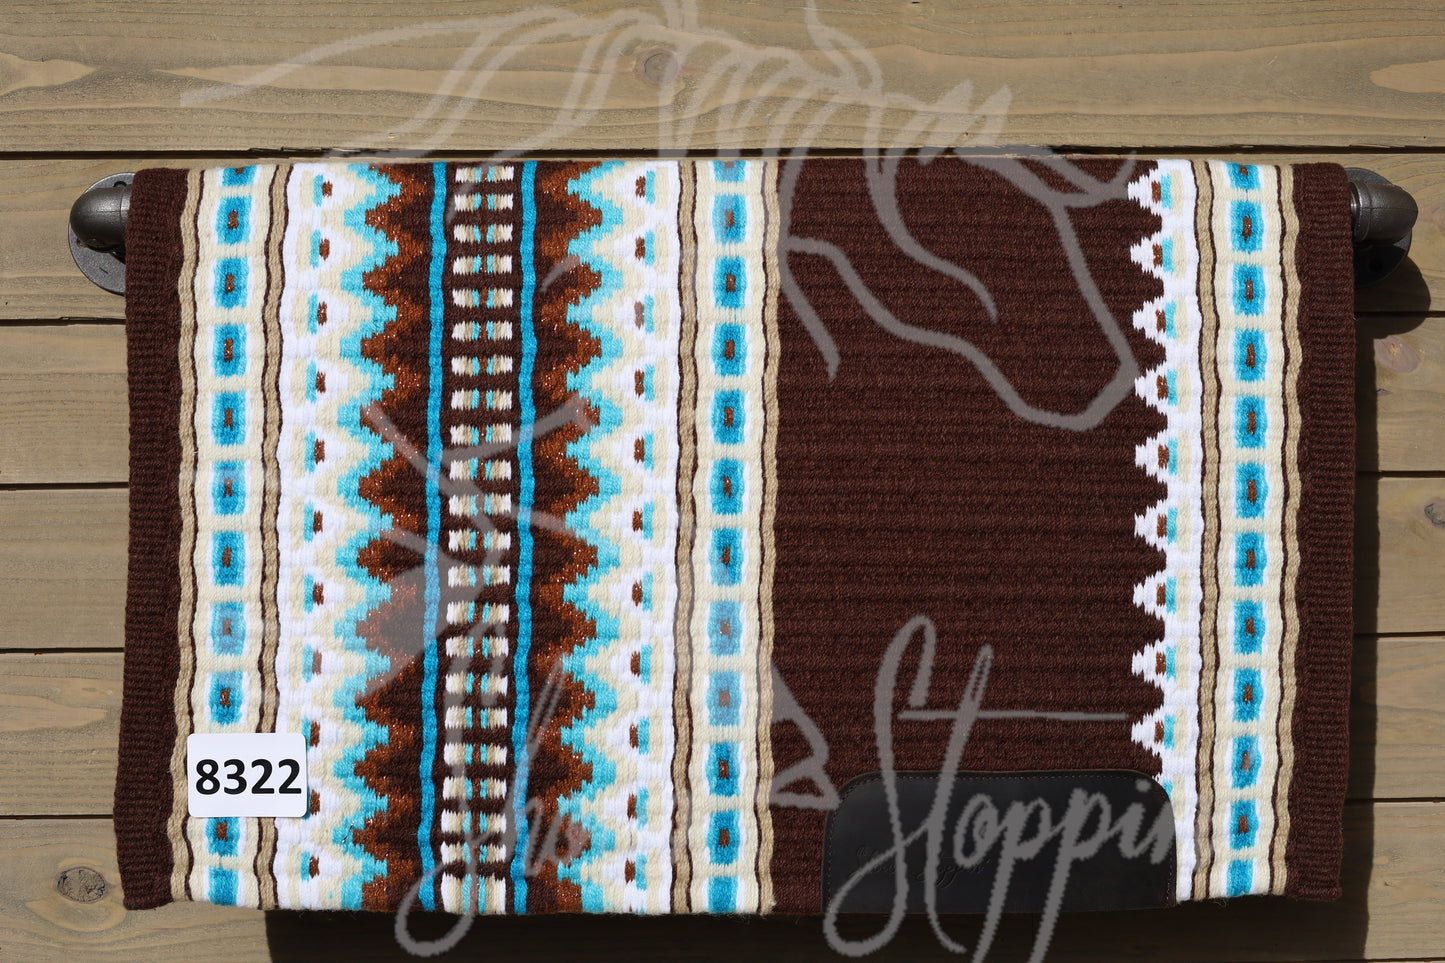 Show Stoppin | Show Blanket | 8322